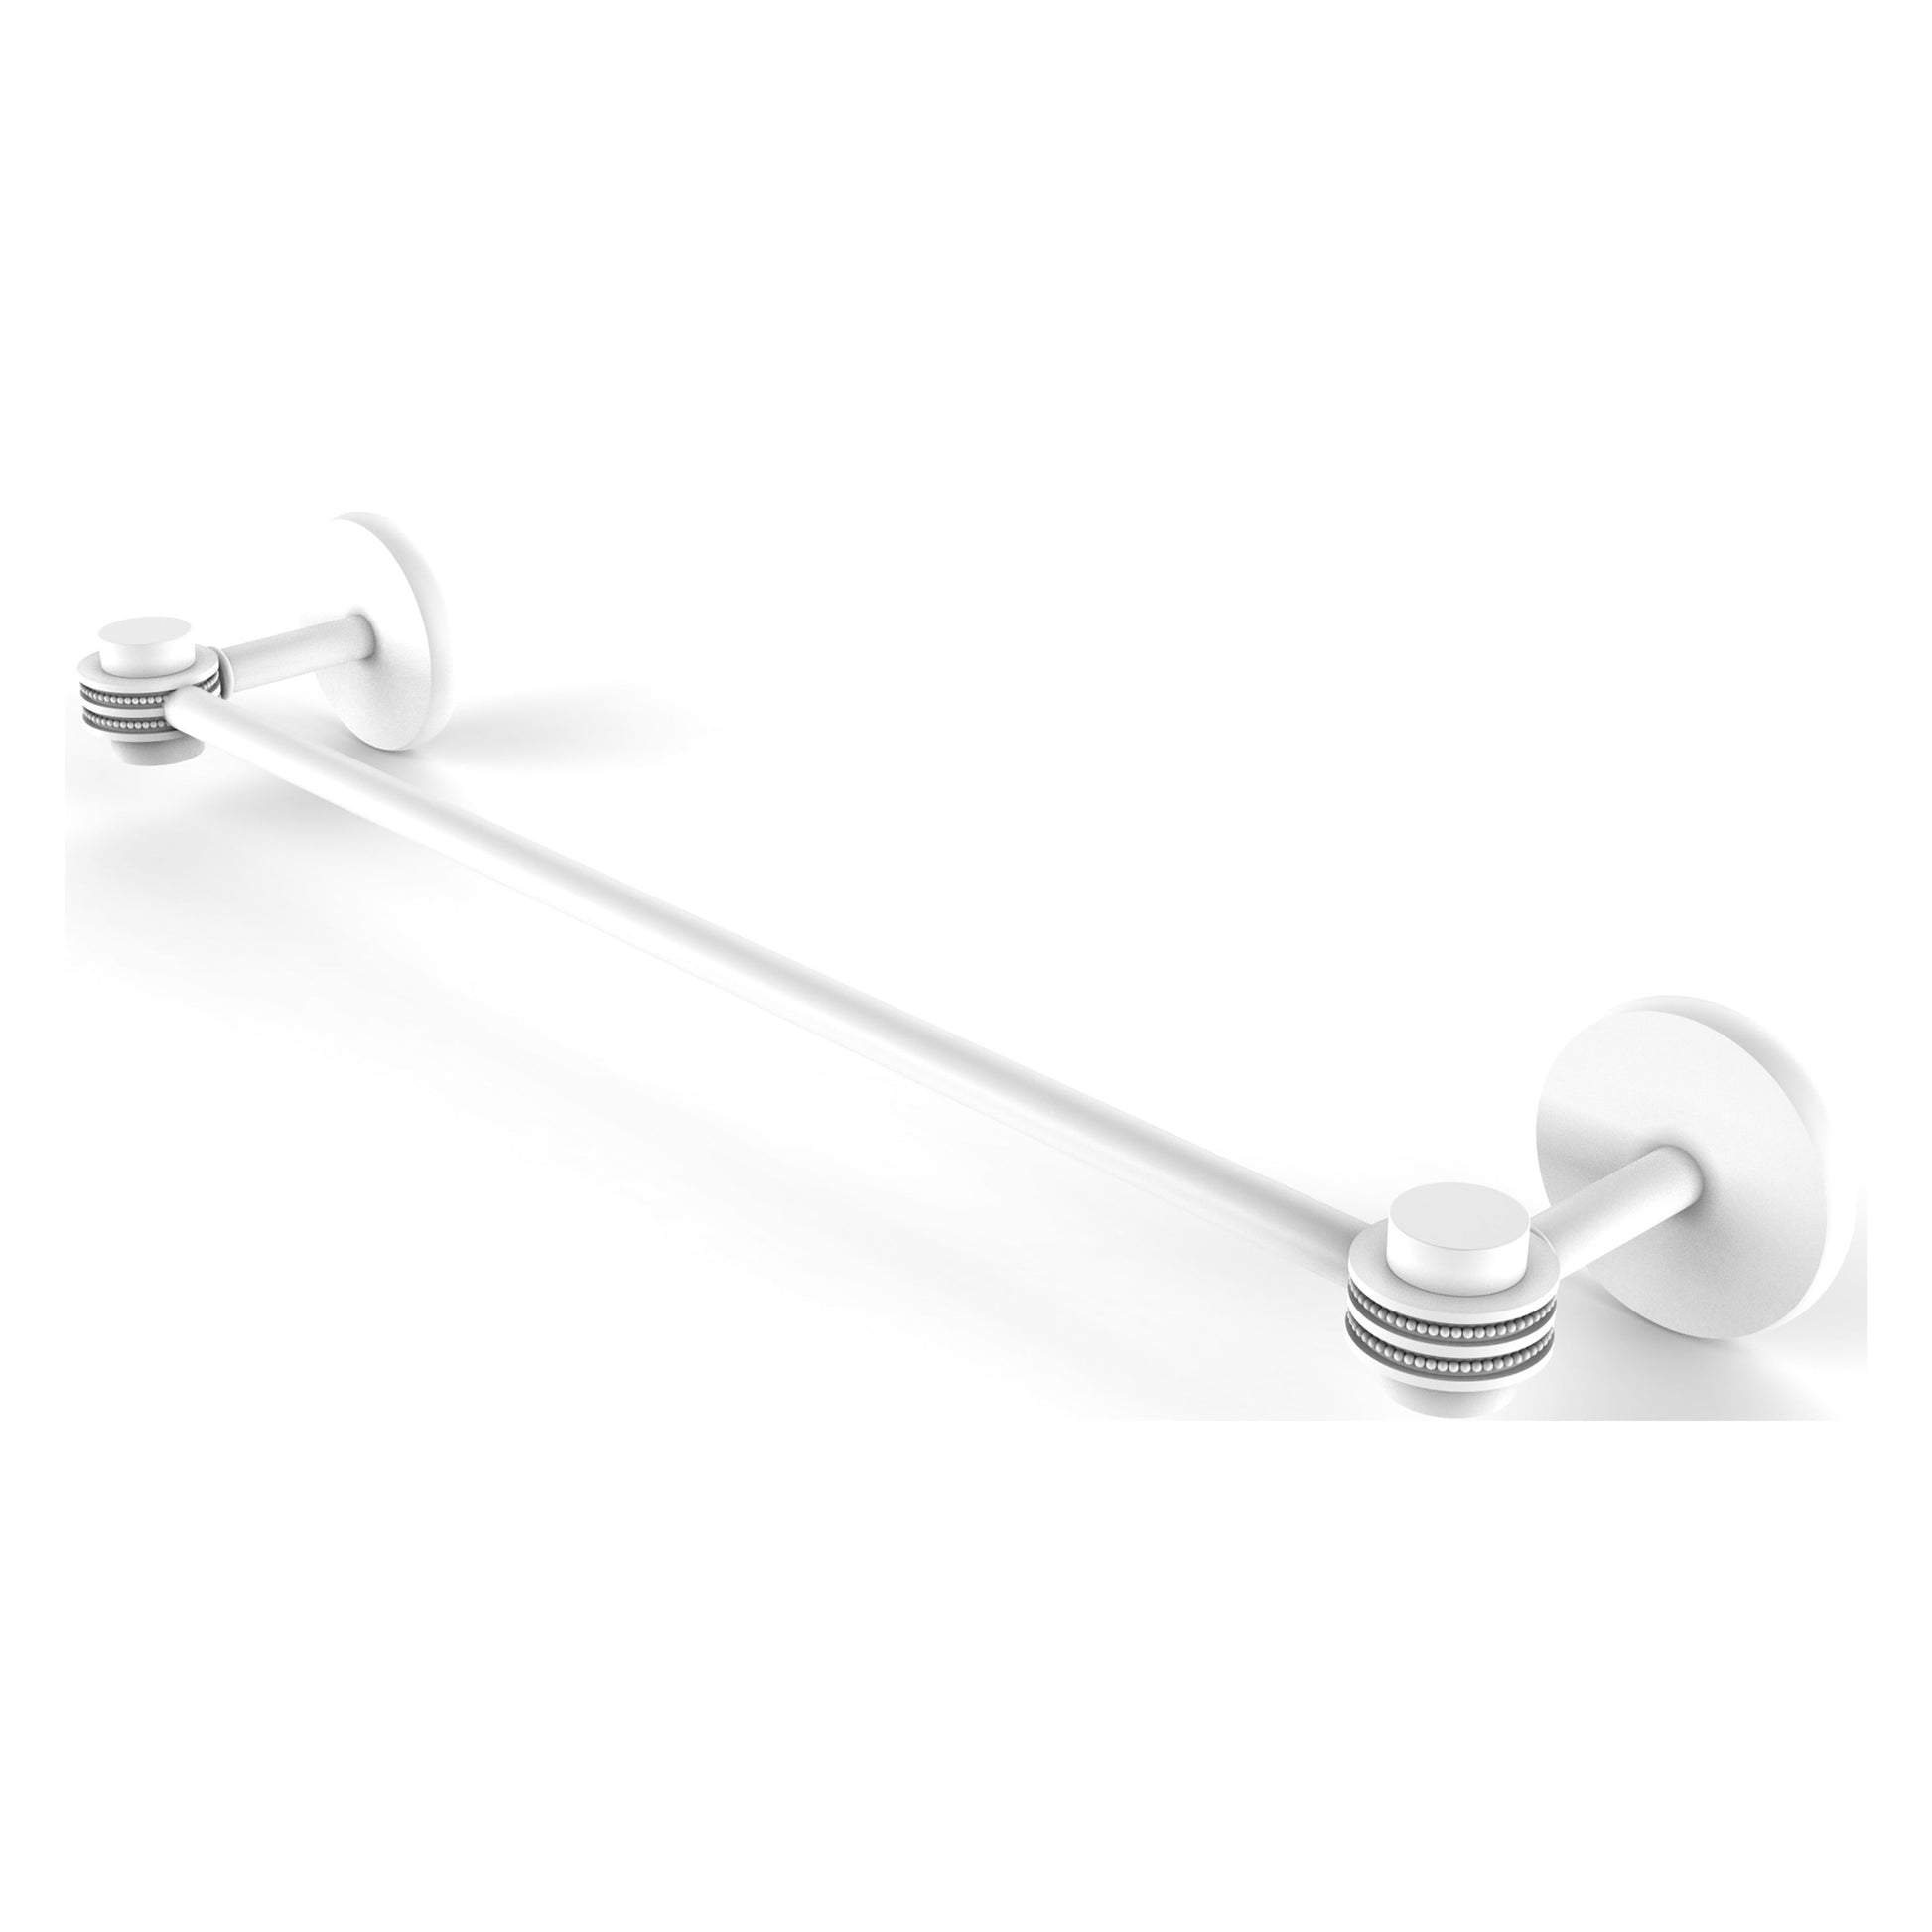 Allied Brass Satellite Orbit One 36" x 38.5" Matte White Solid Brass Towel Bar With Dotted Accents